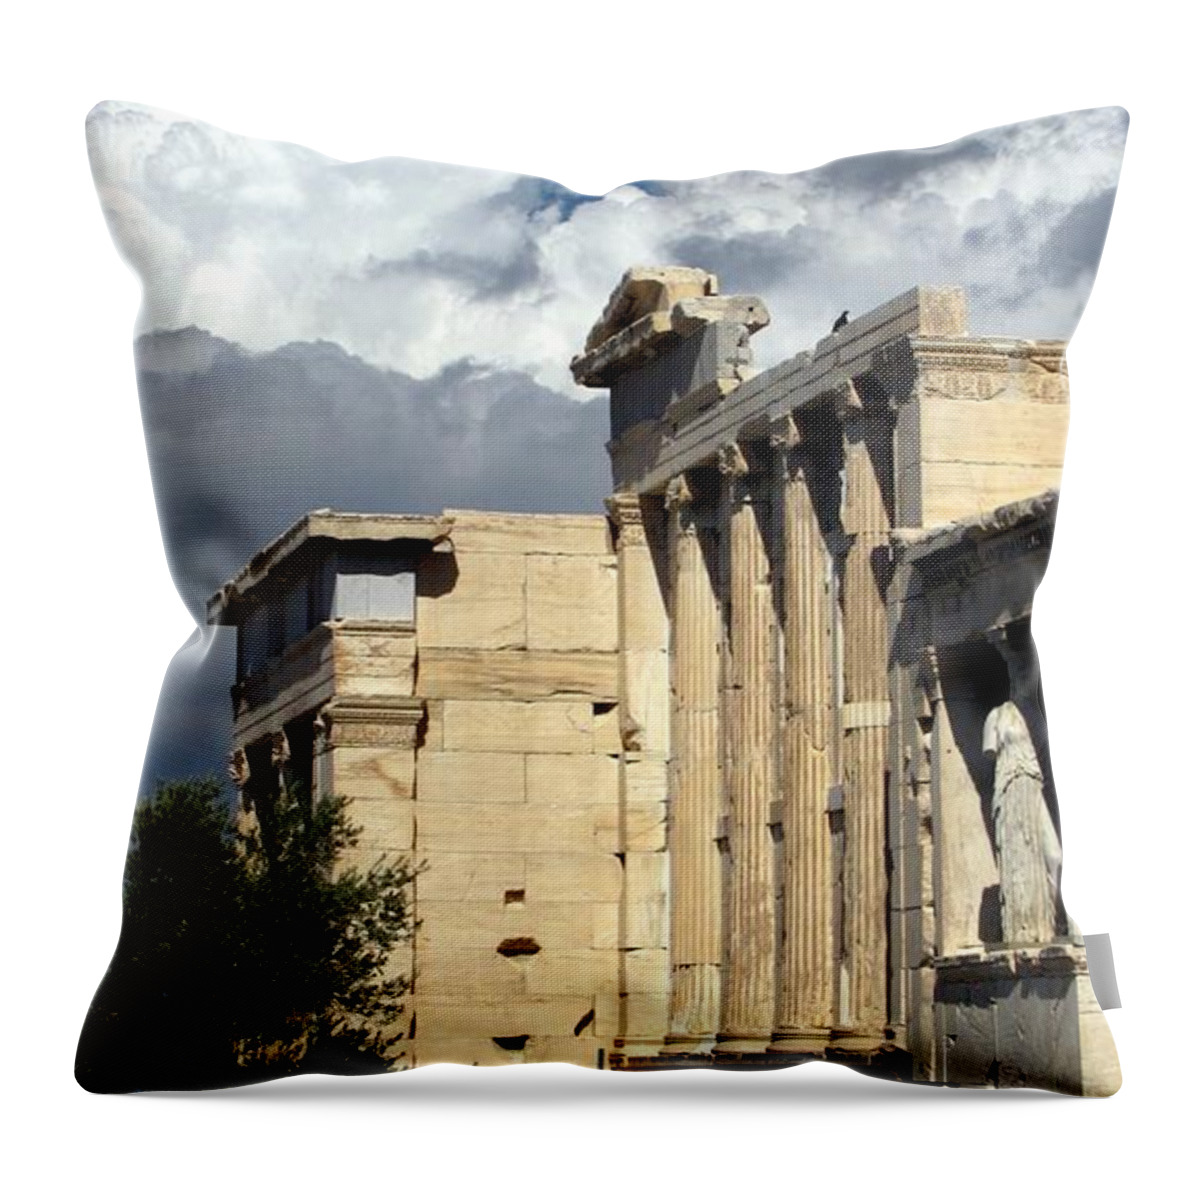 Acropolis Throw Pillow featuring the photograph The Acropolis by Jennifer Wheatley Wolf